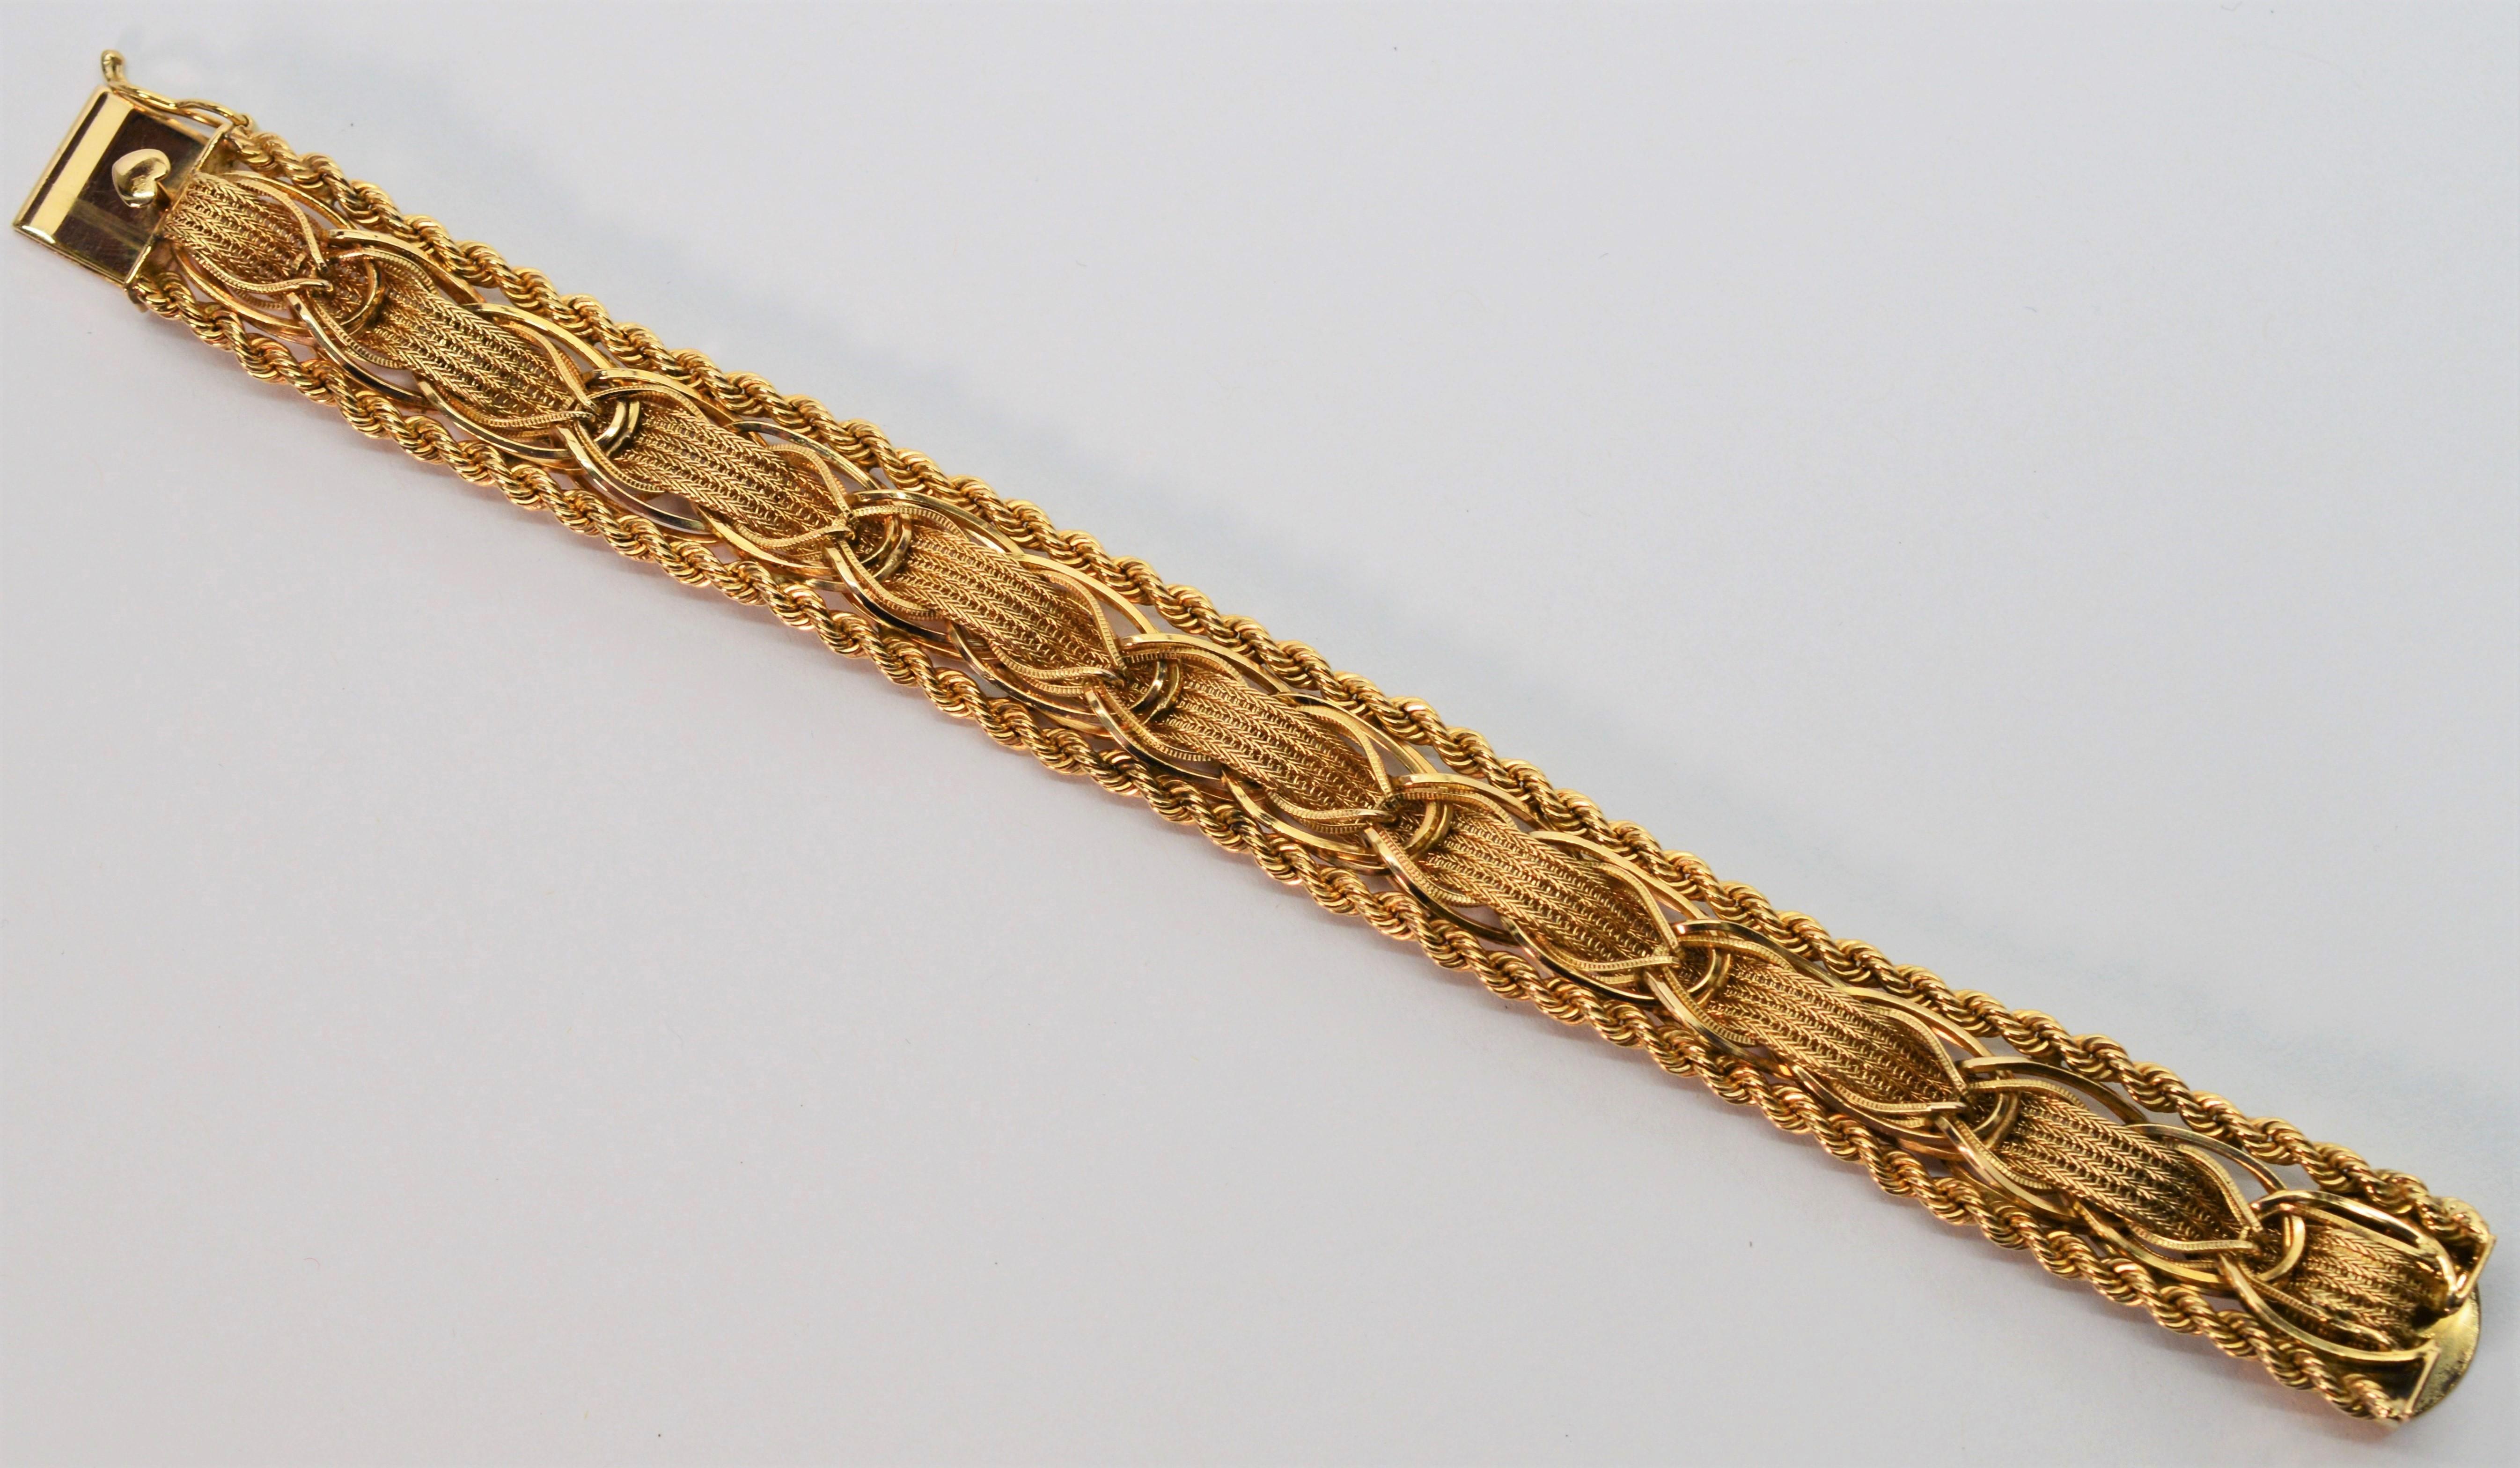 Intricate ribbons of textured fourteen karat 14K yellow gold creatively woven through bright yellow gold links and finished with gold roping detailing make this bracelet an artful find. 
Measuring 7 inches in length and 5/8th inch wide, this piece